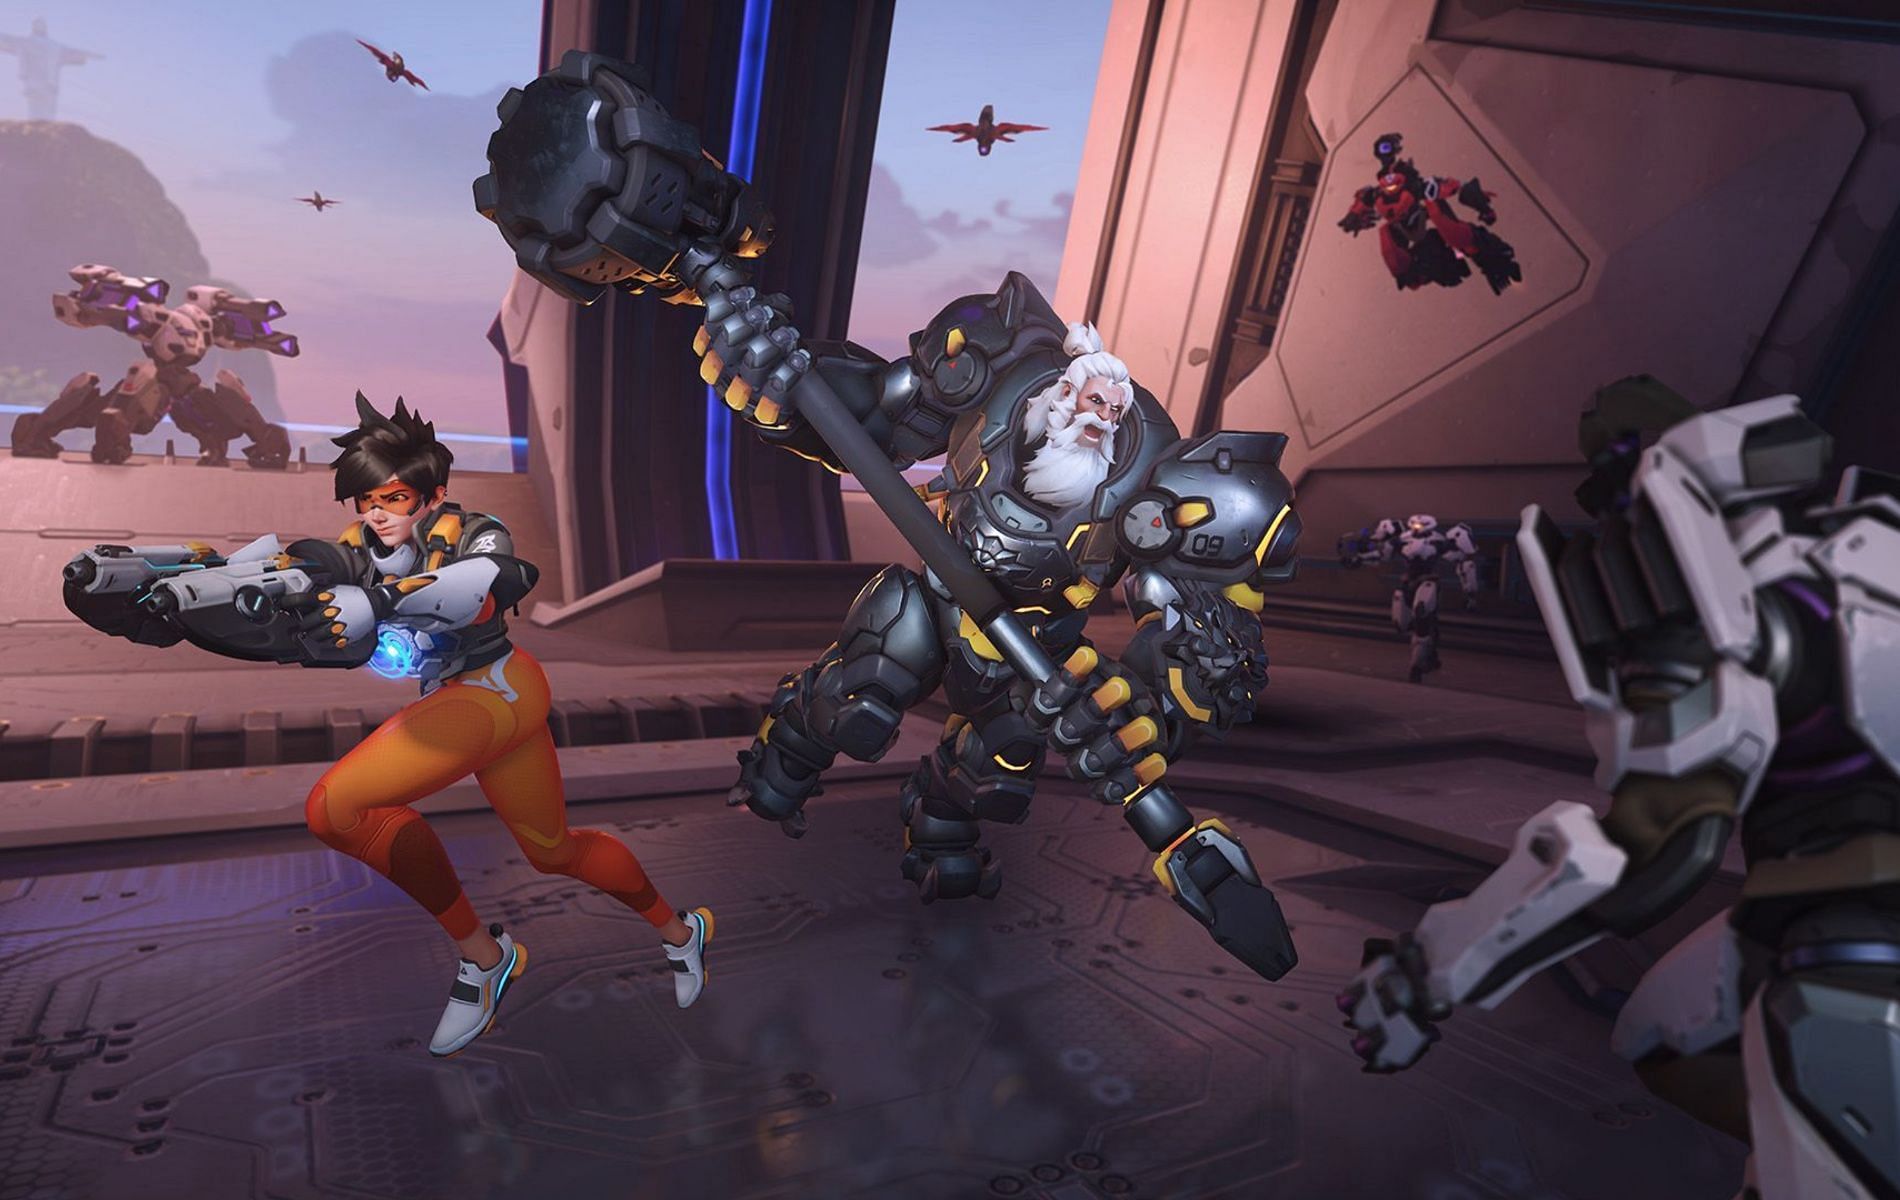 Promotional art for Overwatch 2